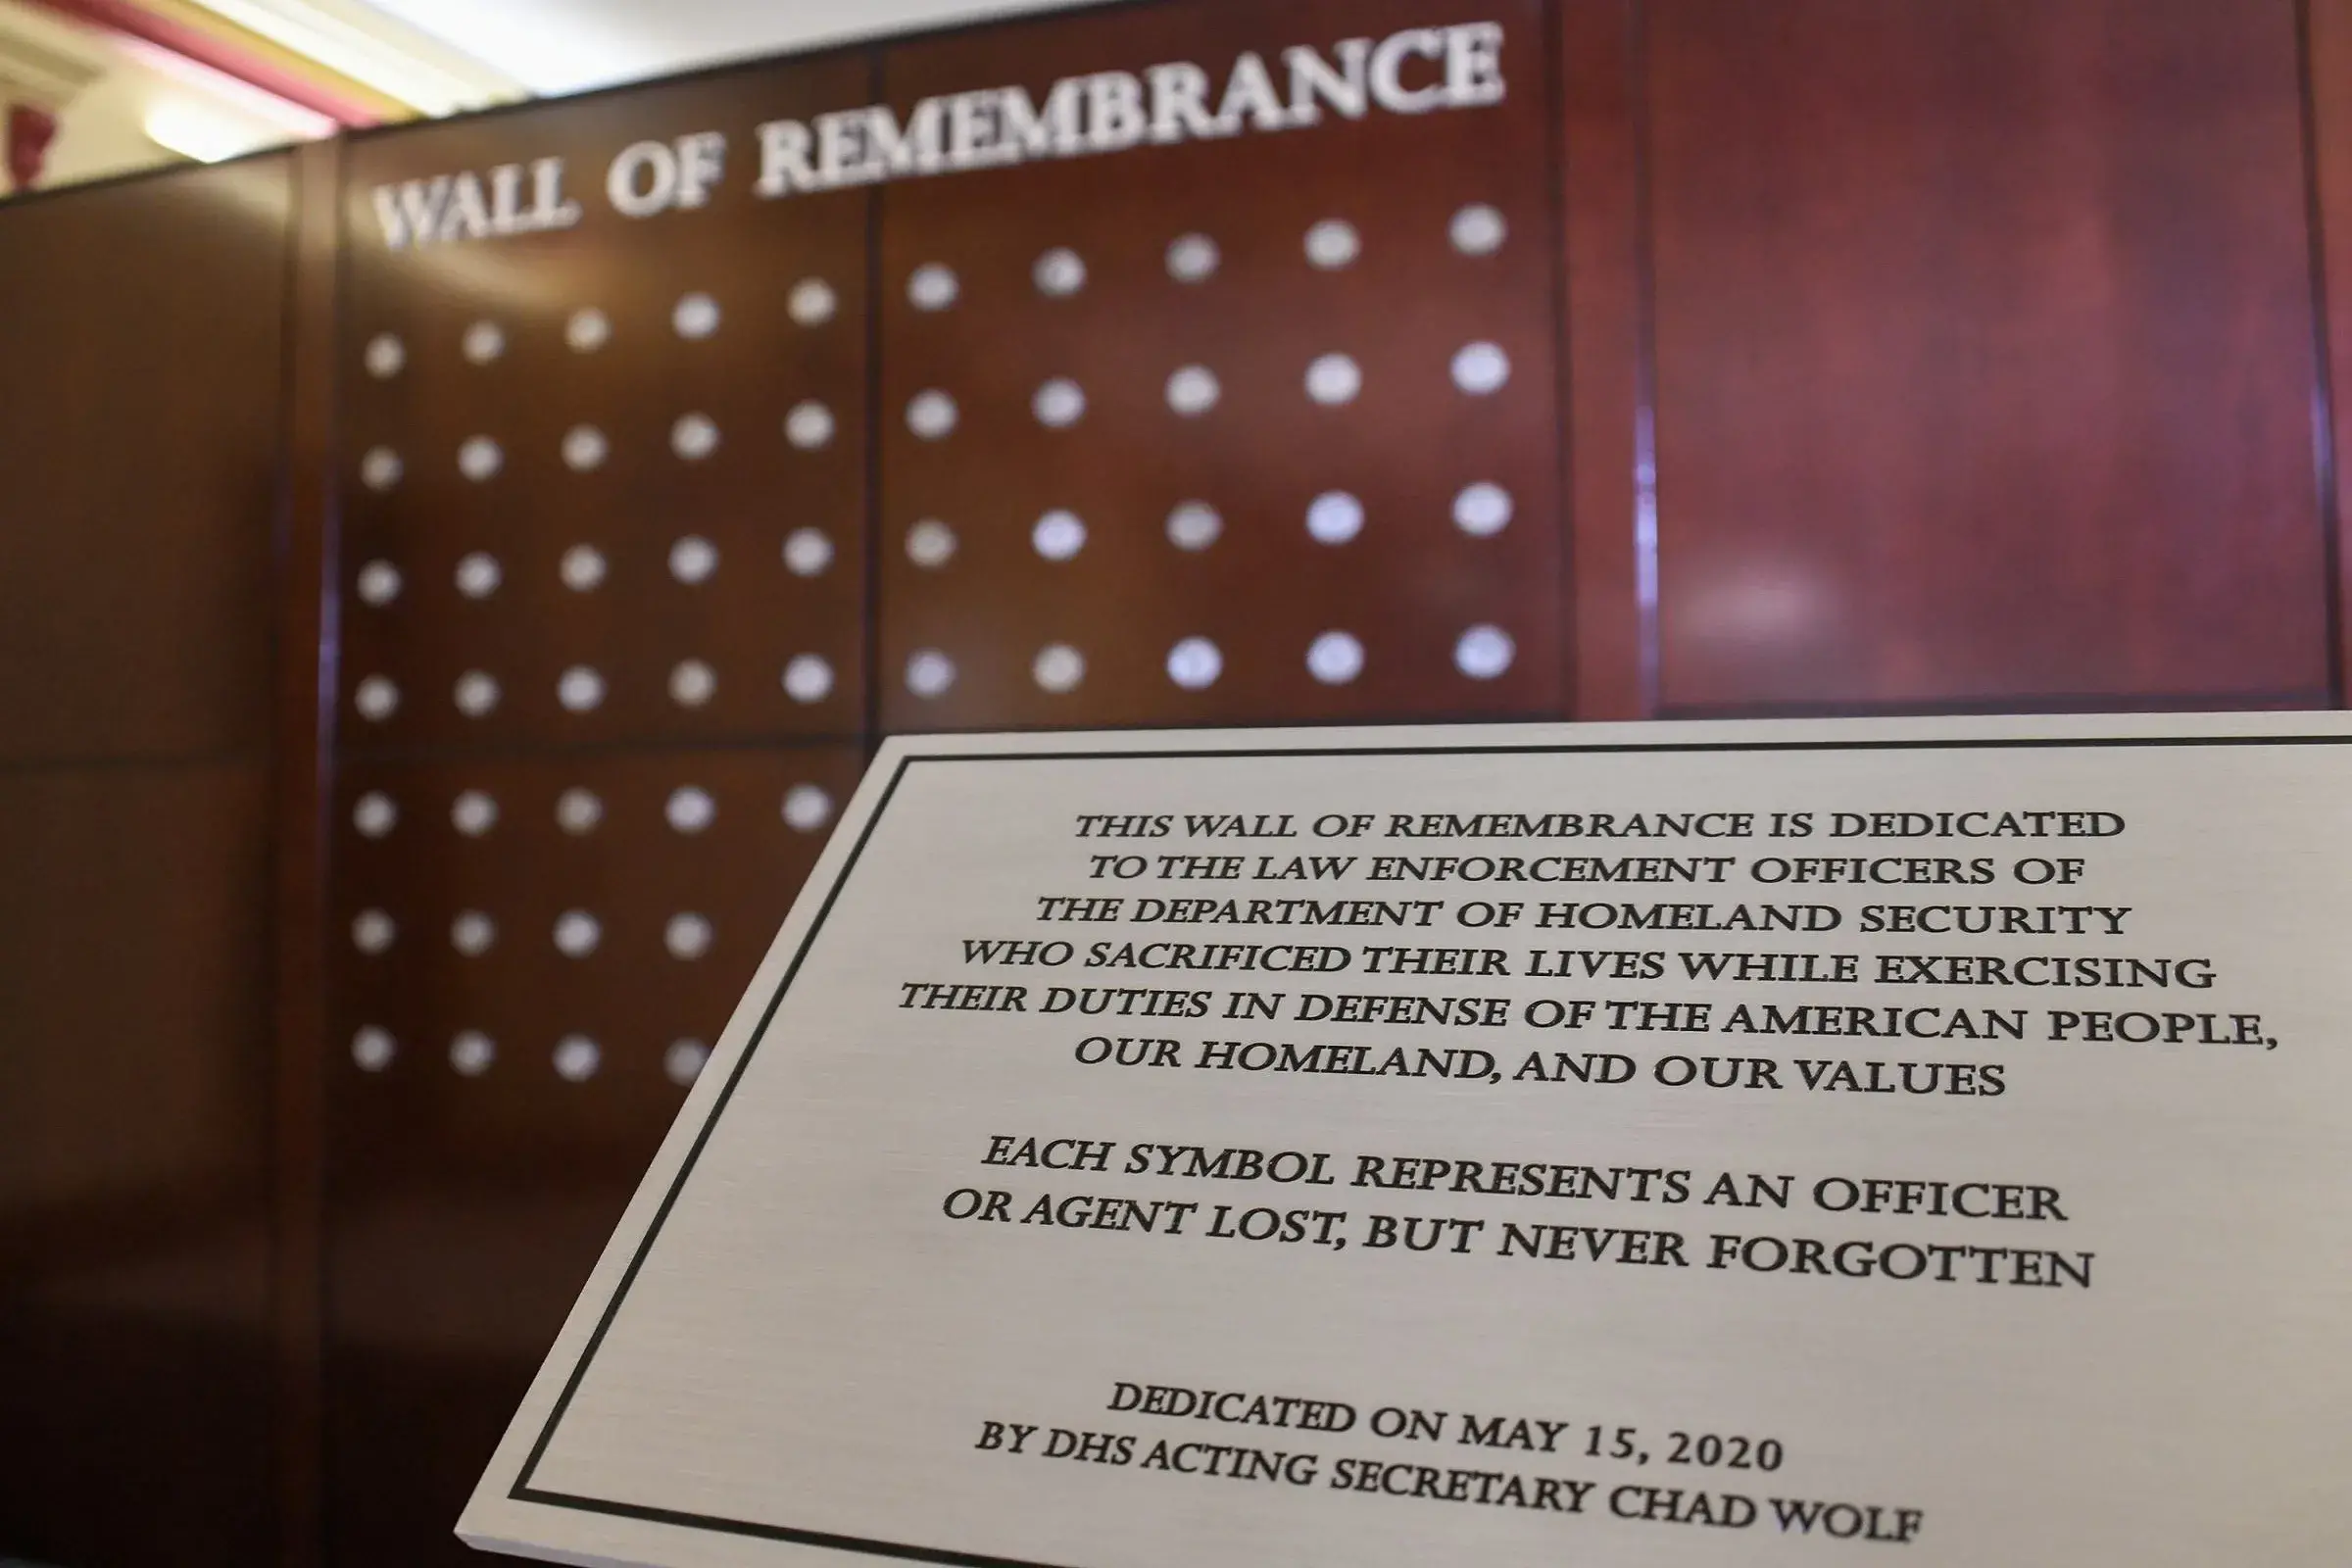 Wall of Remembrance, DHS headquarters